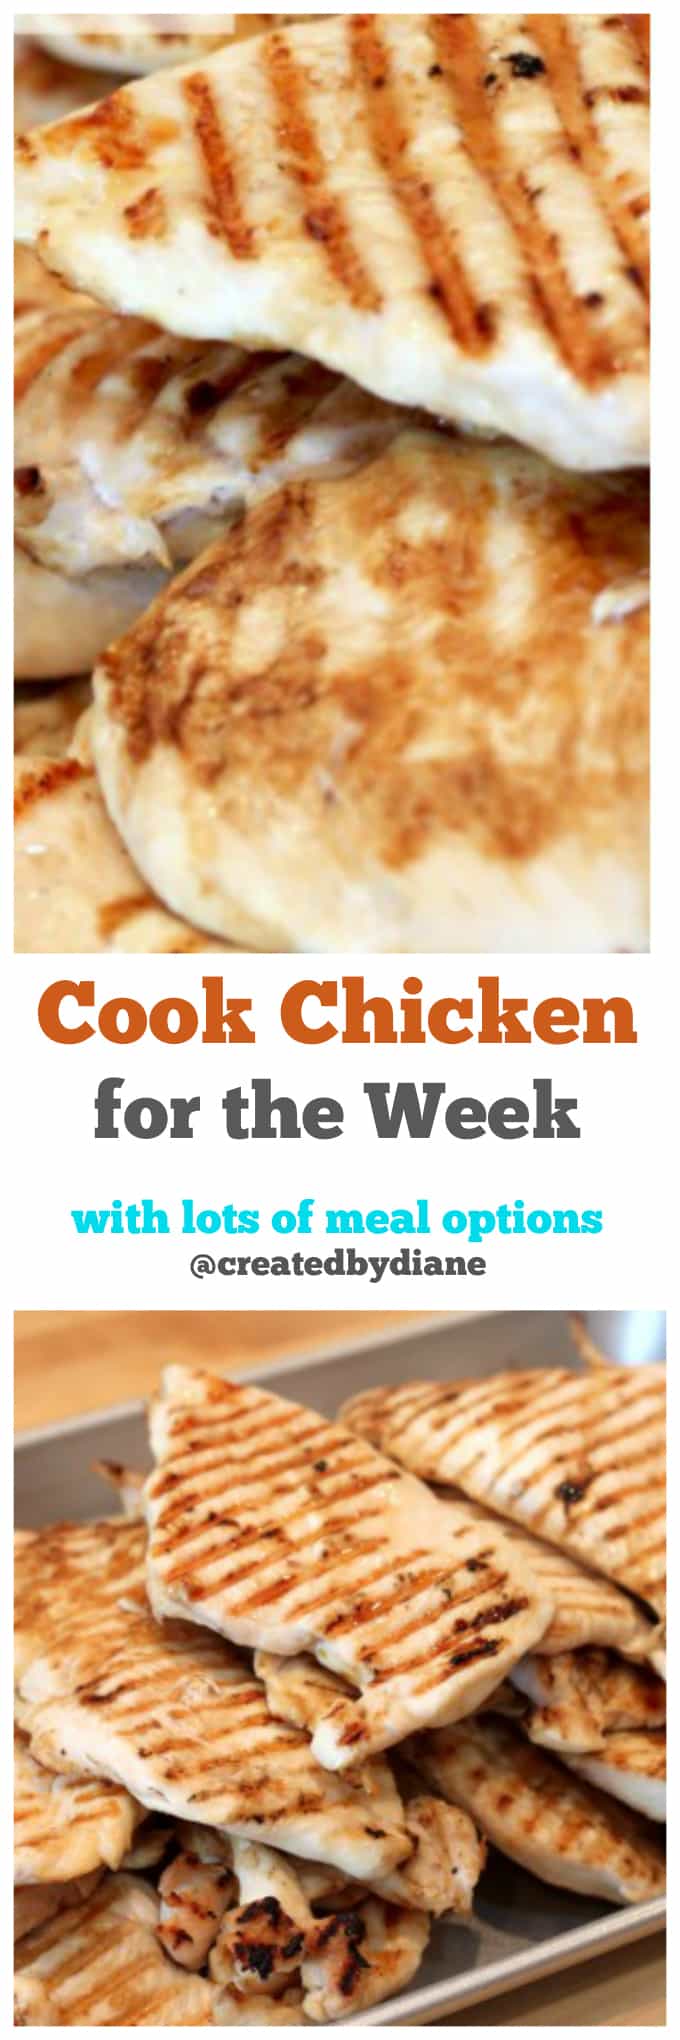 cook chicken for the week with lots of meal options